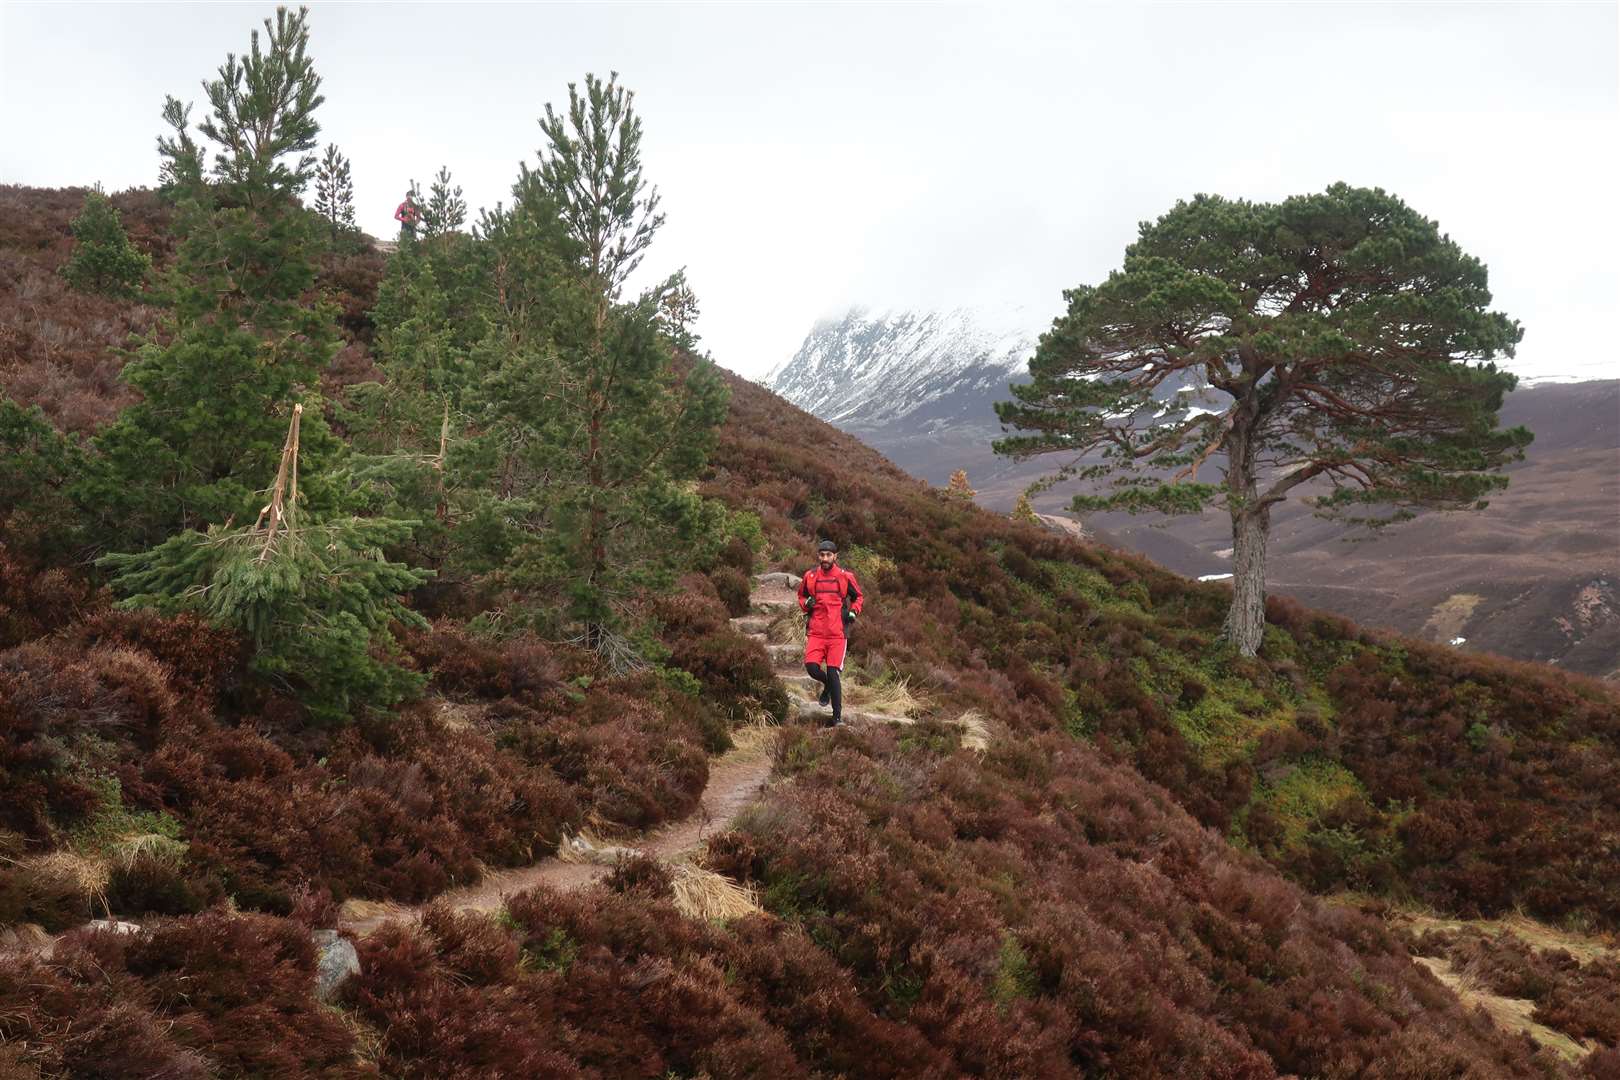 Balraj makes his way down the Lairig Ghru path into the forest.